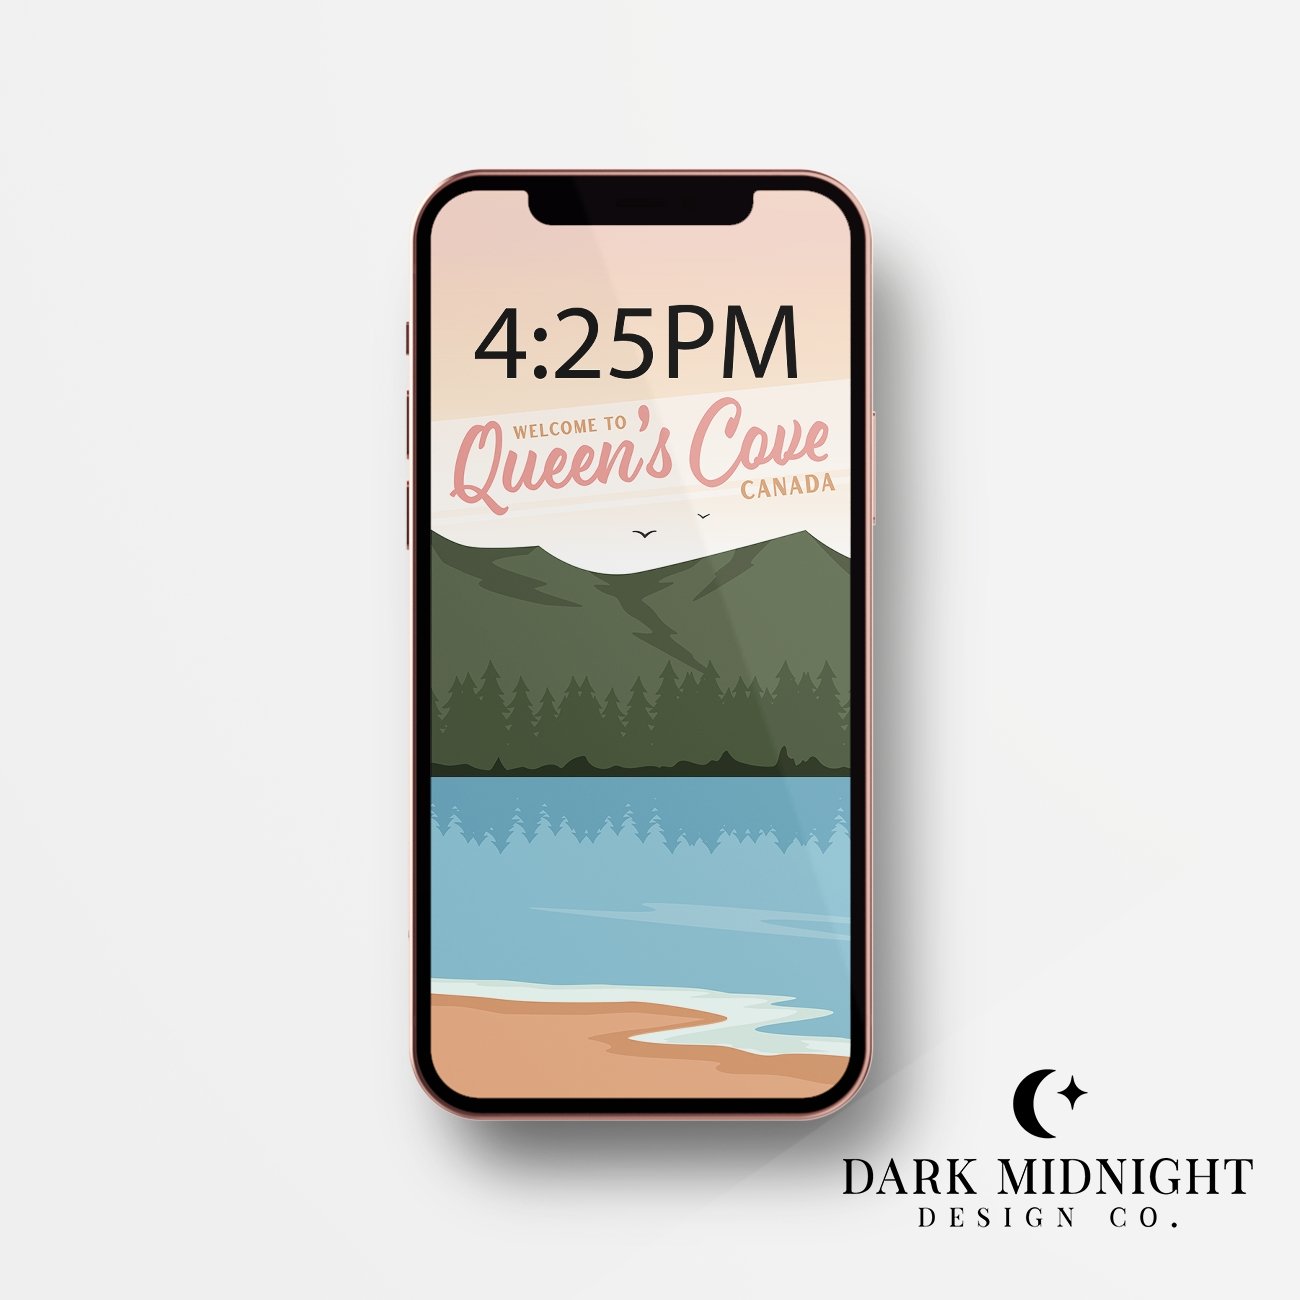 Scenic Queen's Cove Phone Wallpaper - Officially Licensed Queen's Cove Series - Dark Midnight Design Co